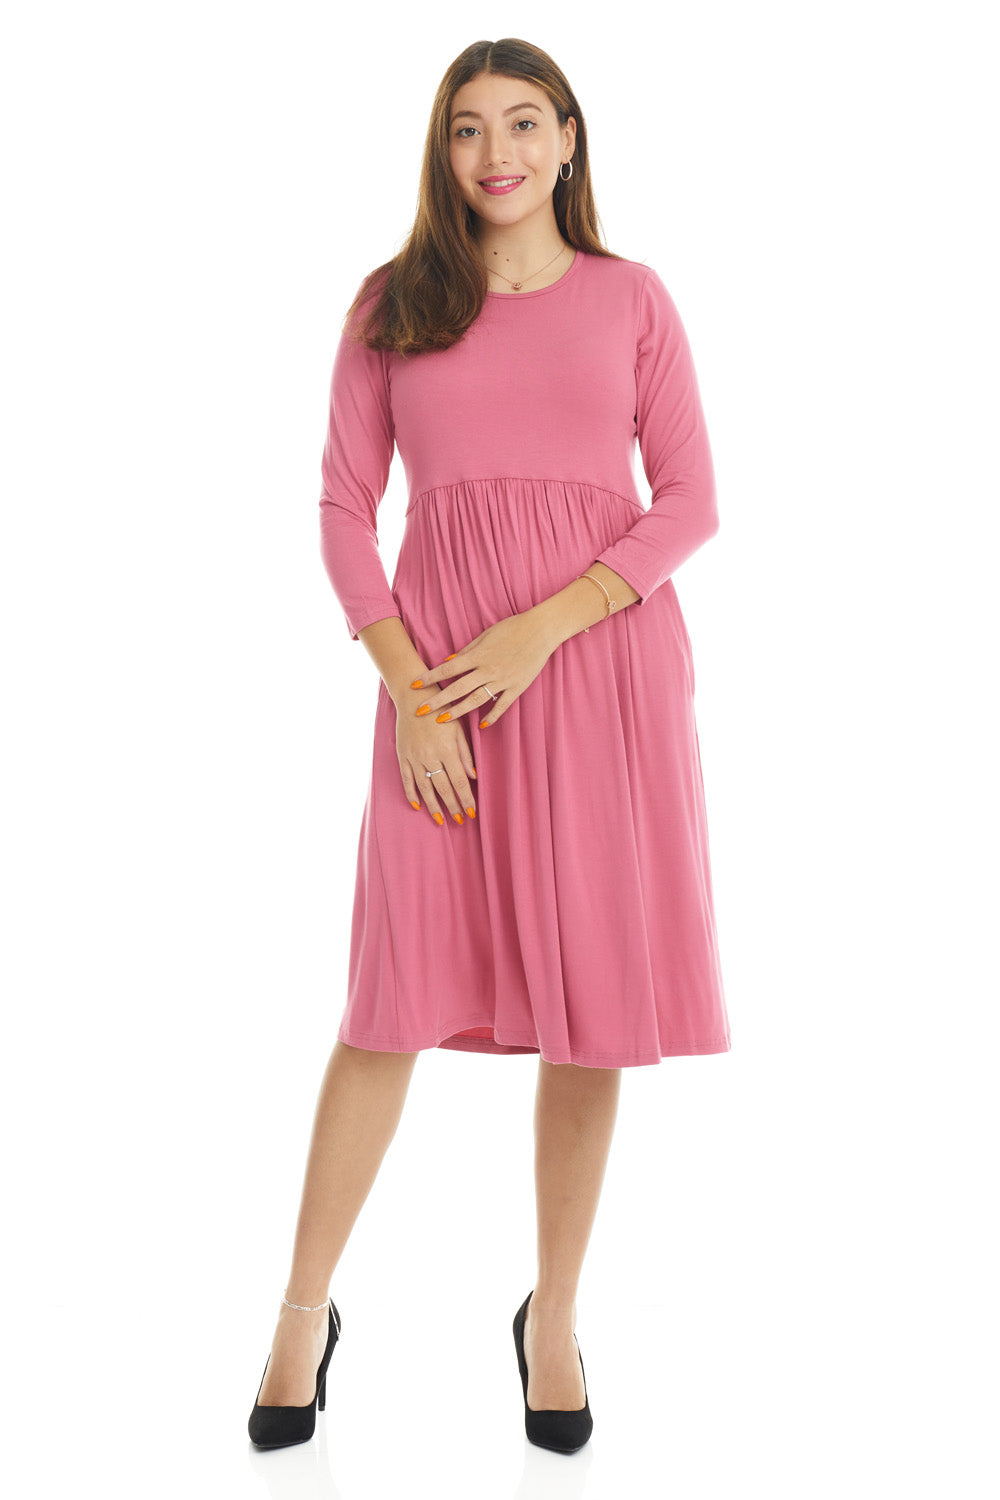 pink modest 3/4 sleeve swing dress with pockets